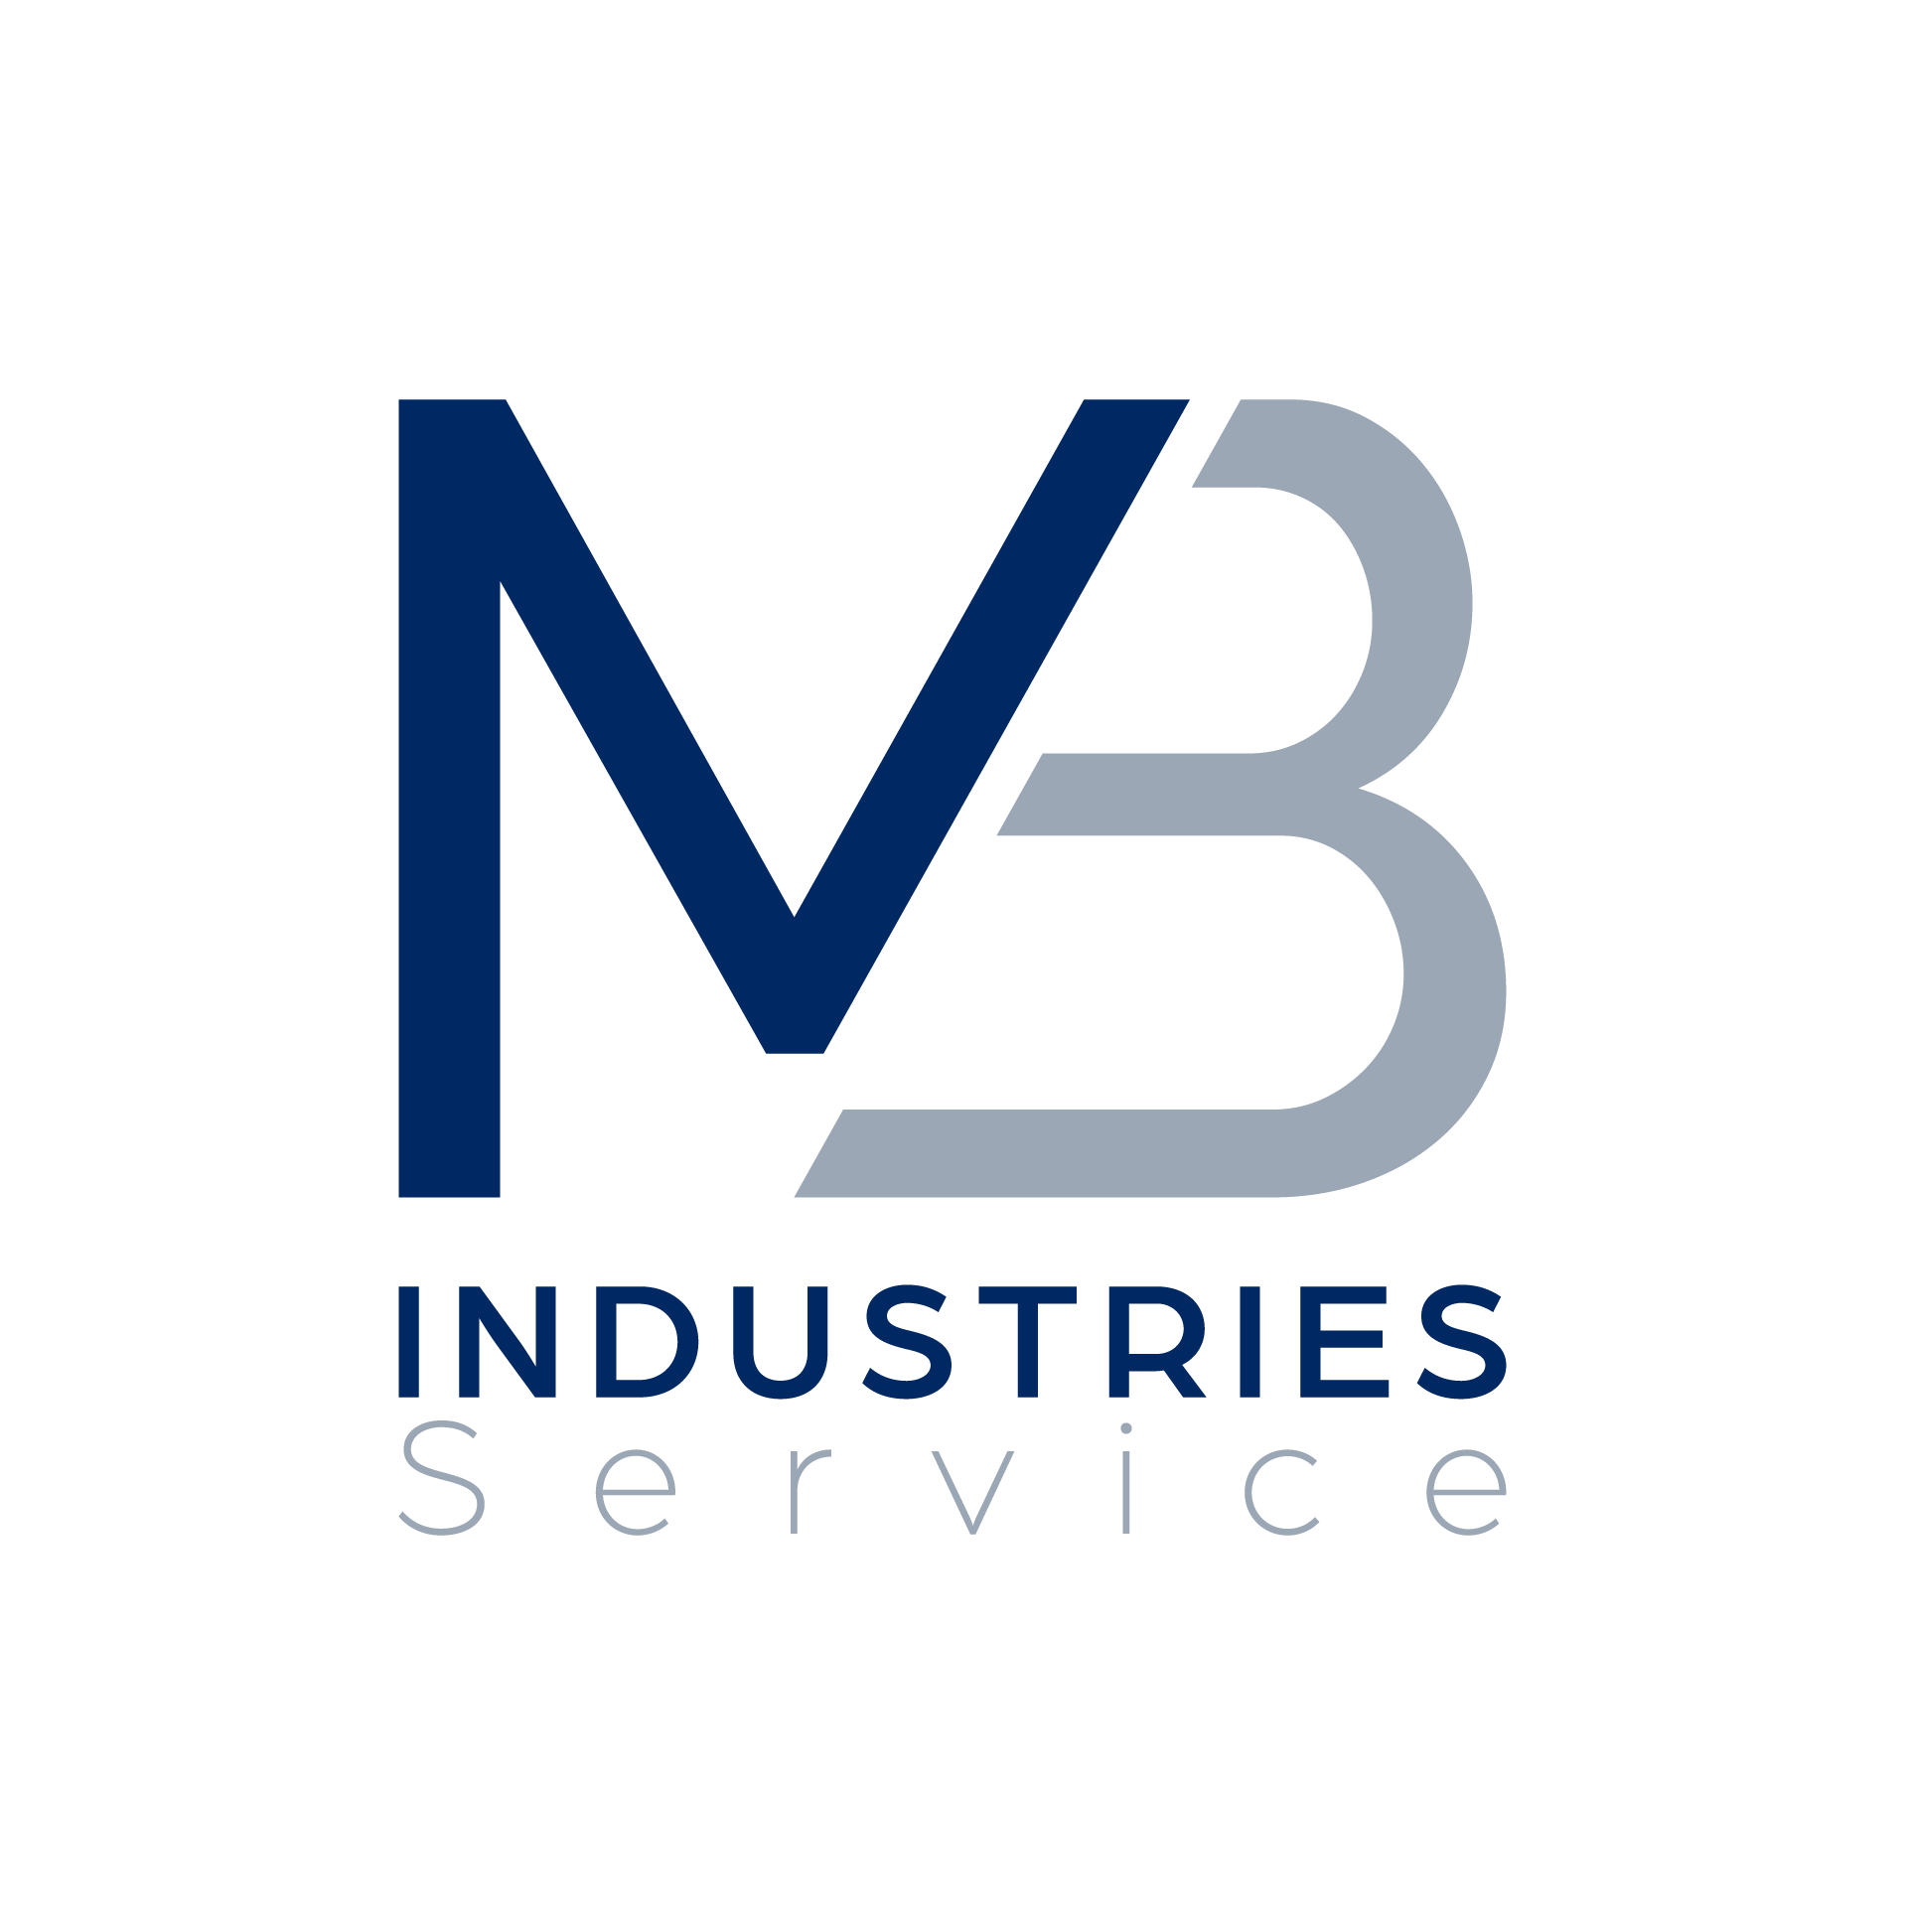 MB Industries Service